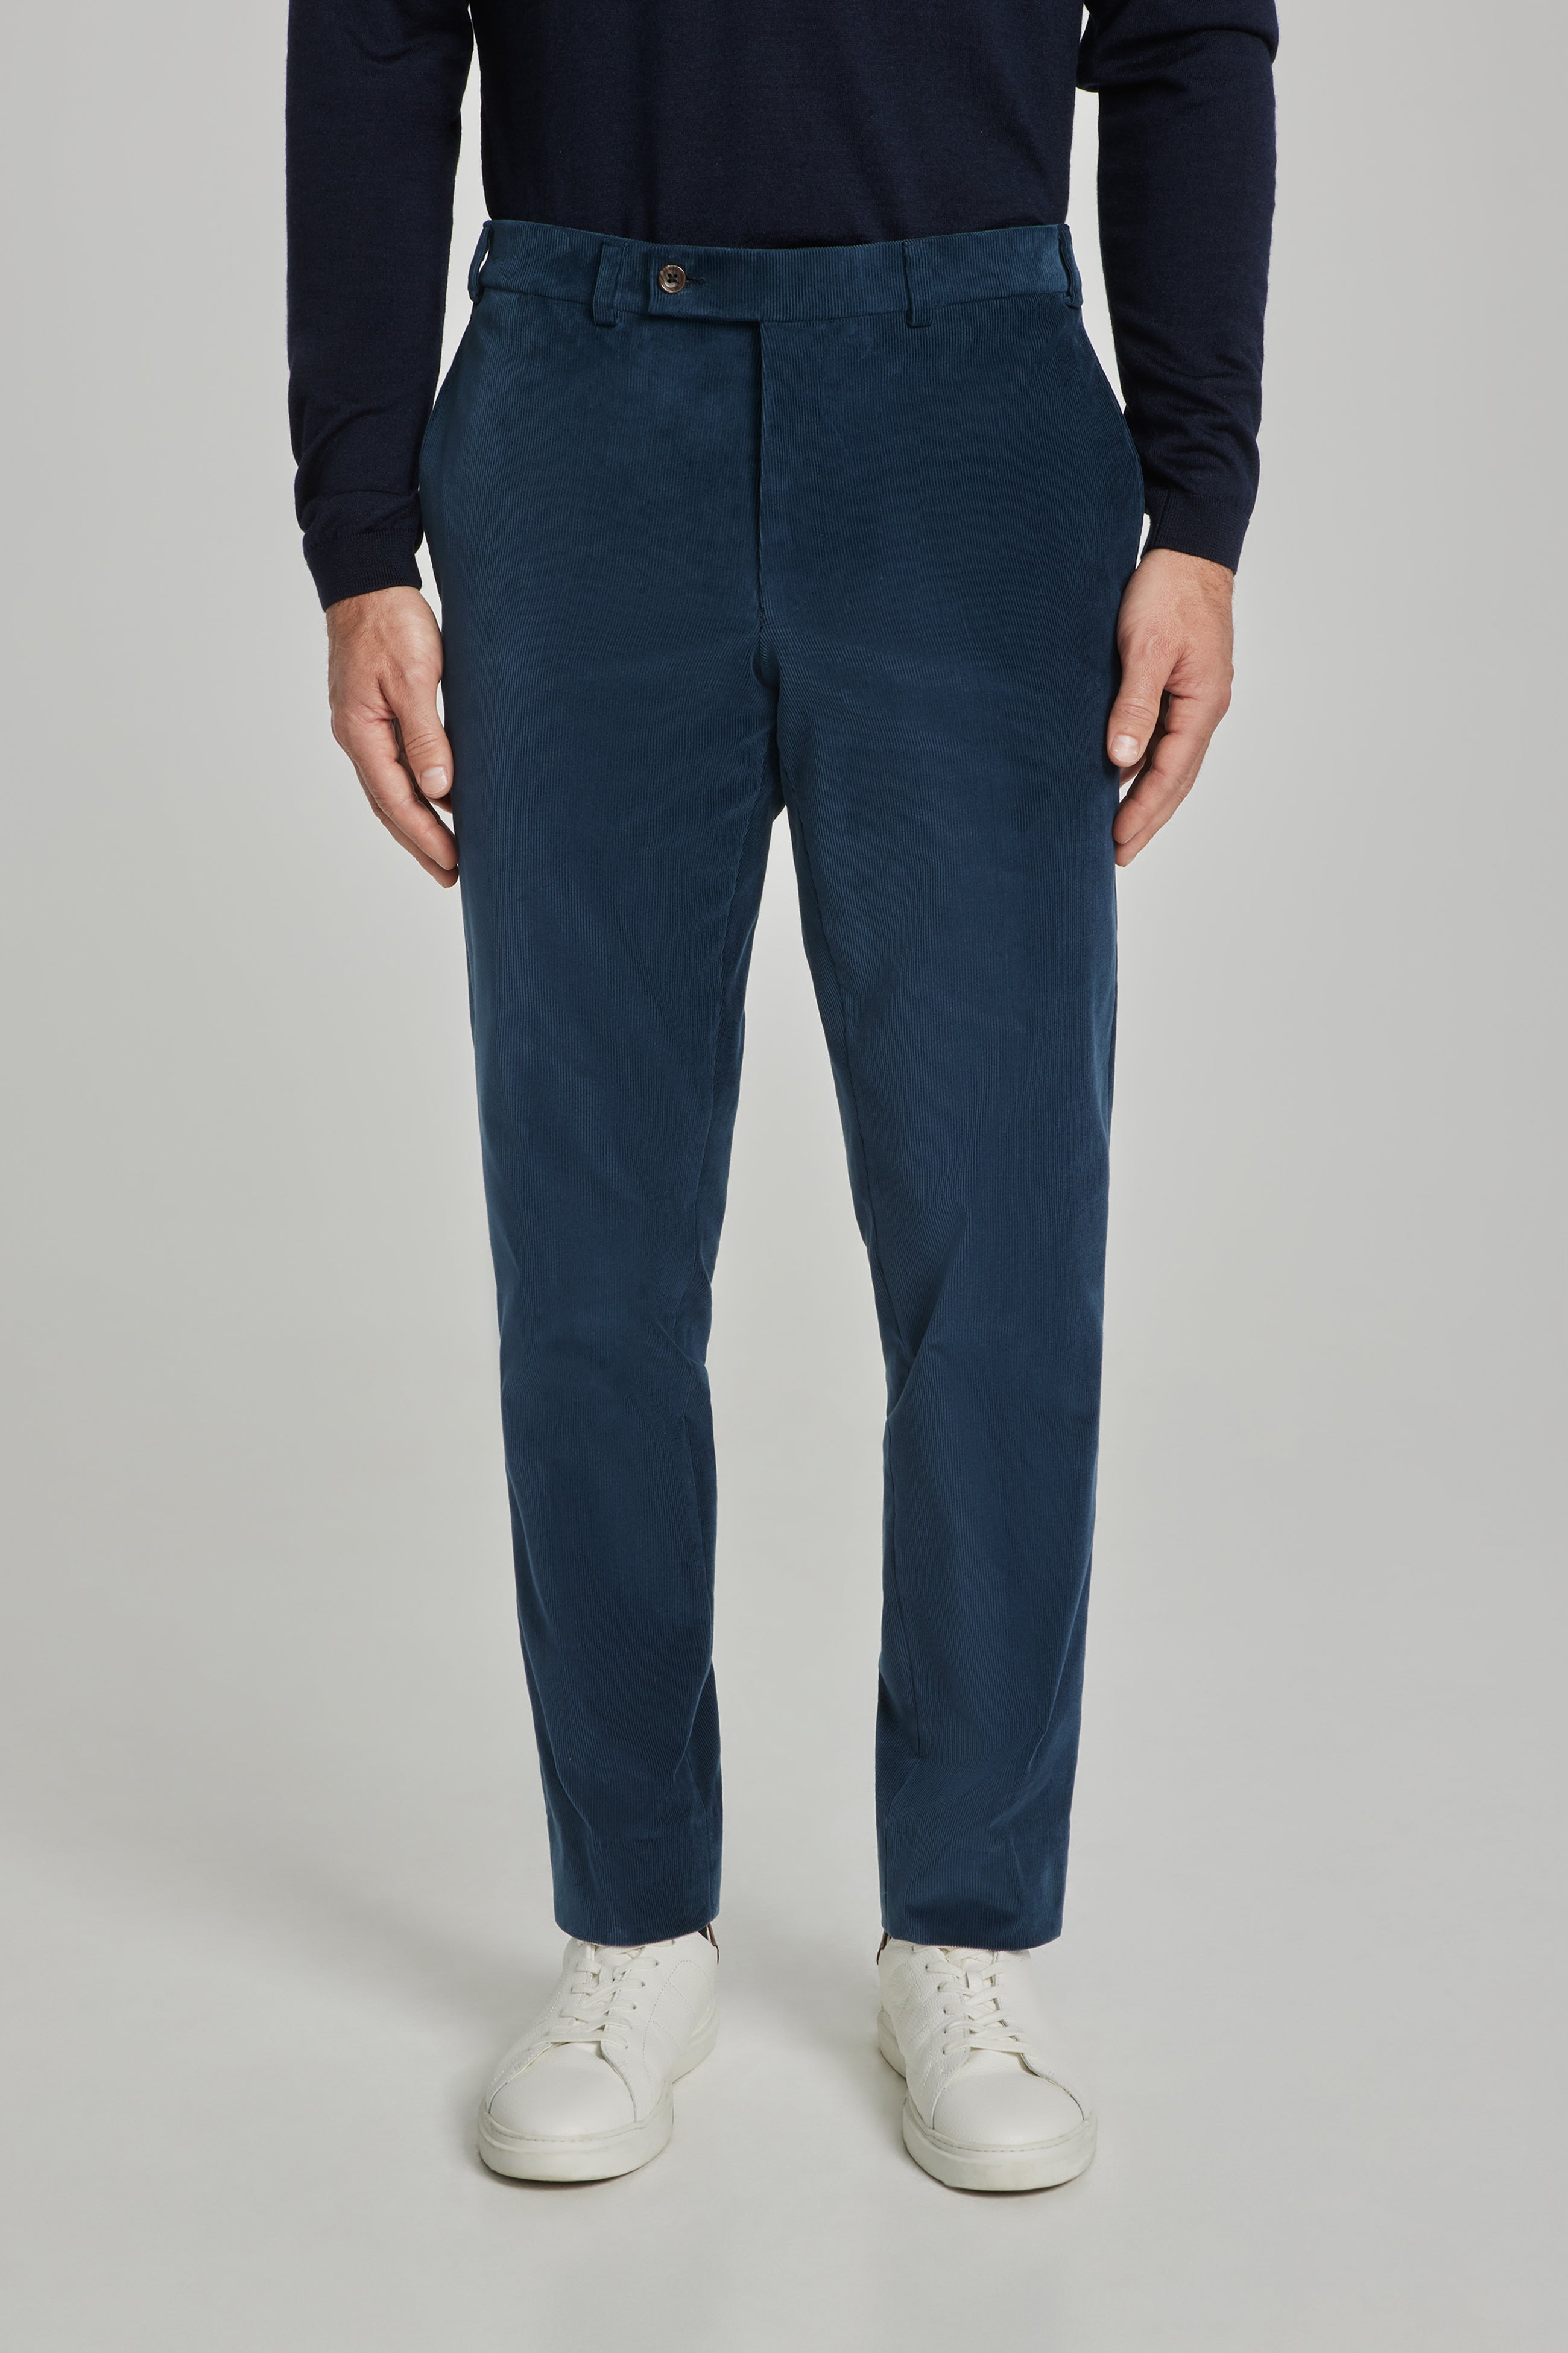 Alt view Pablo Corduroy Trouser in Teal